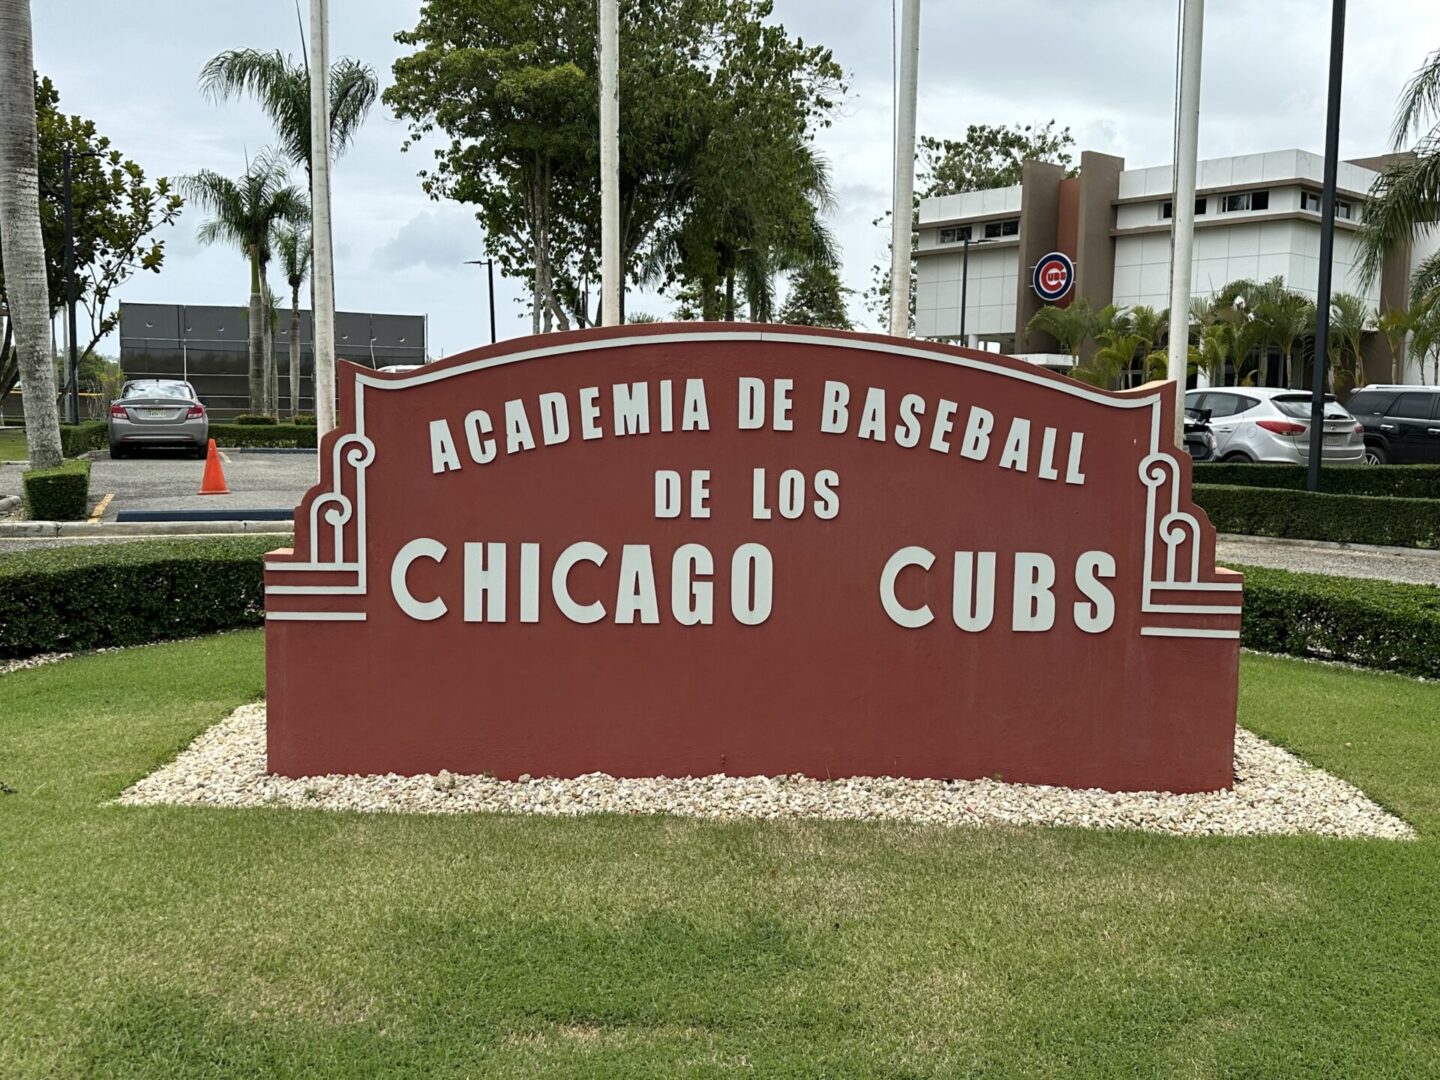 A sign for the chicago cubs baseball team.